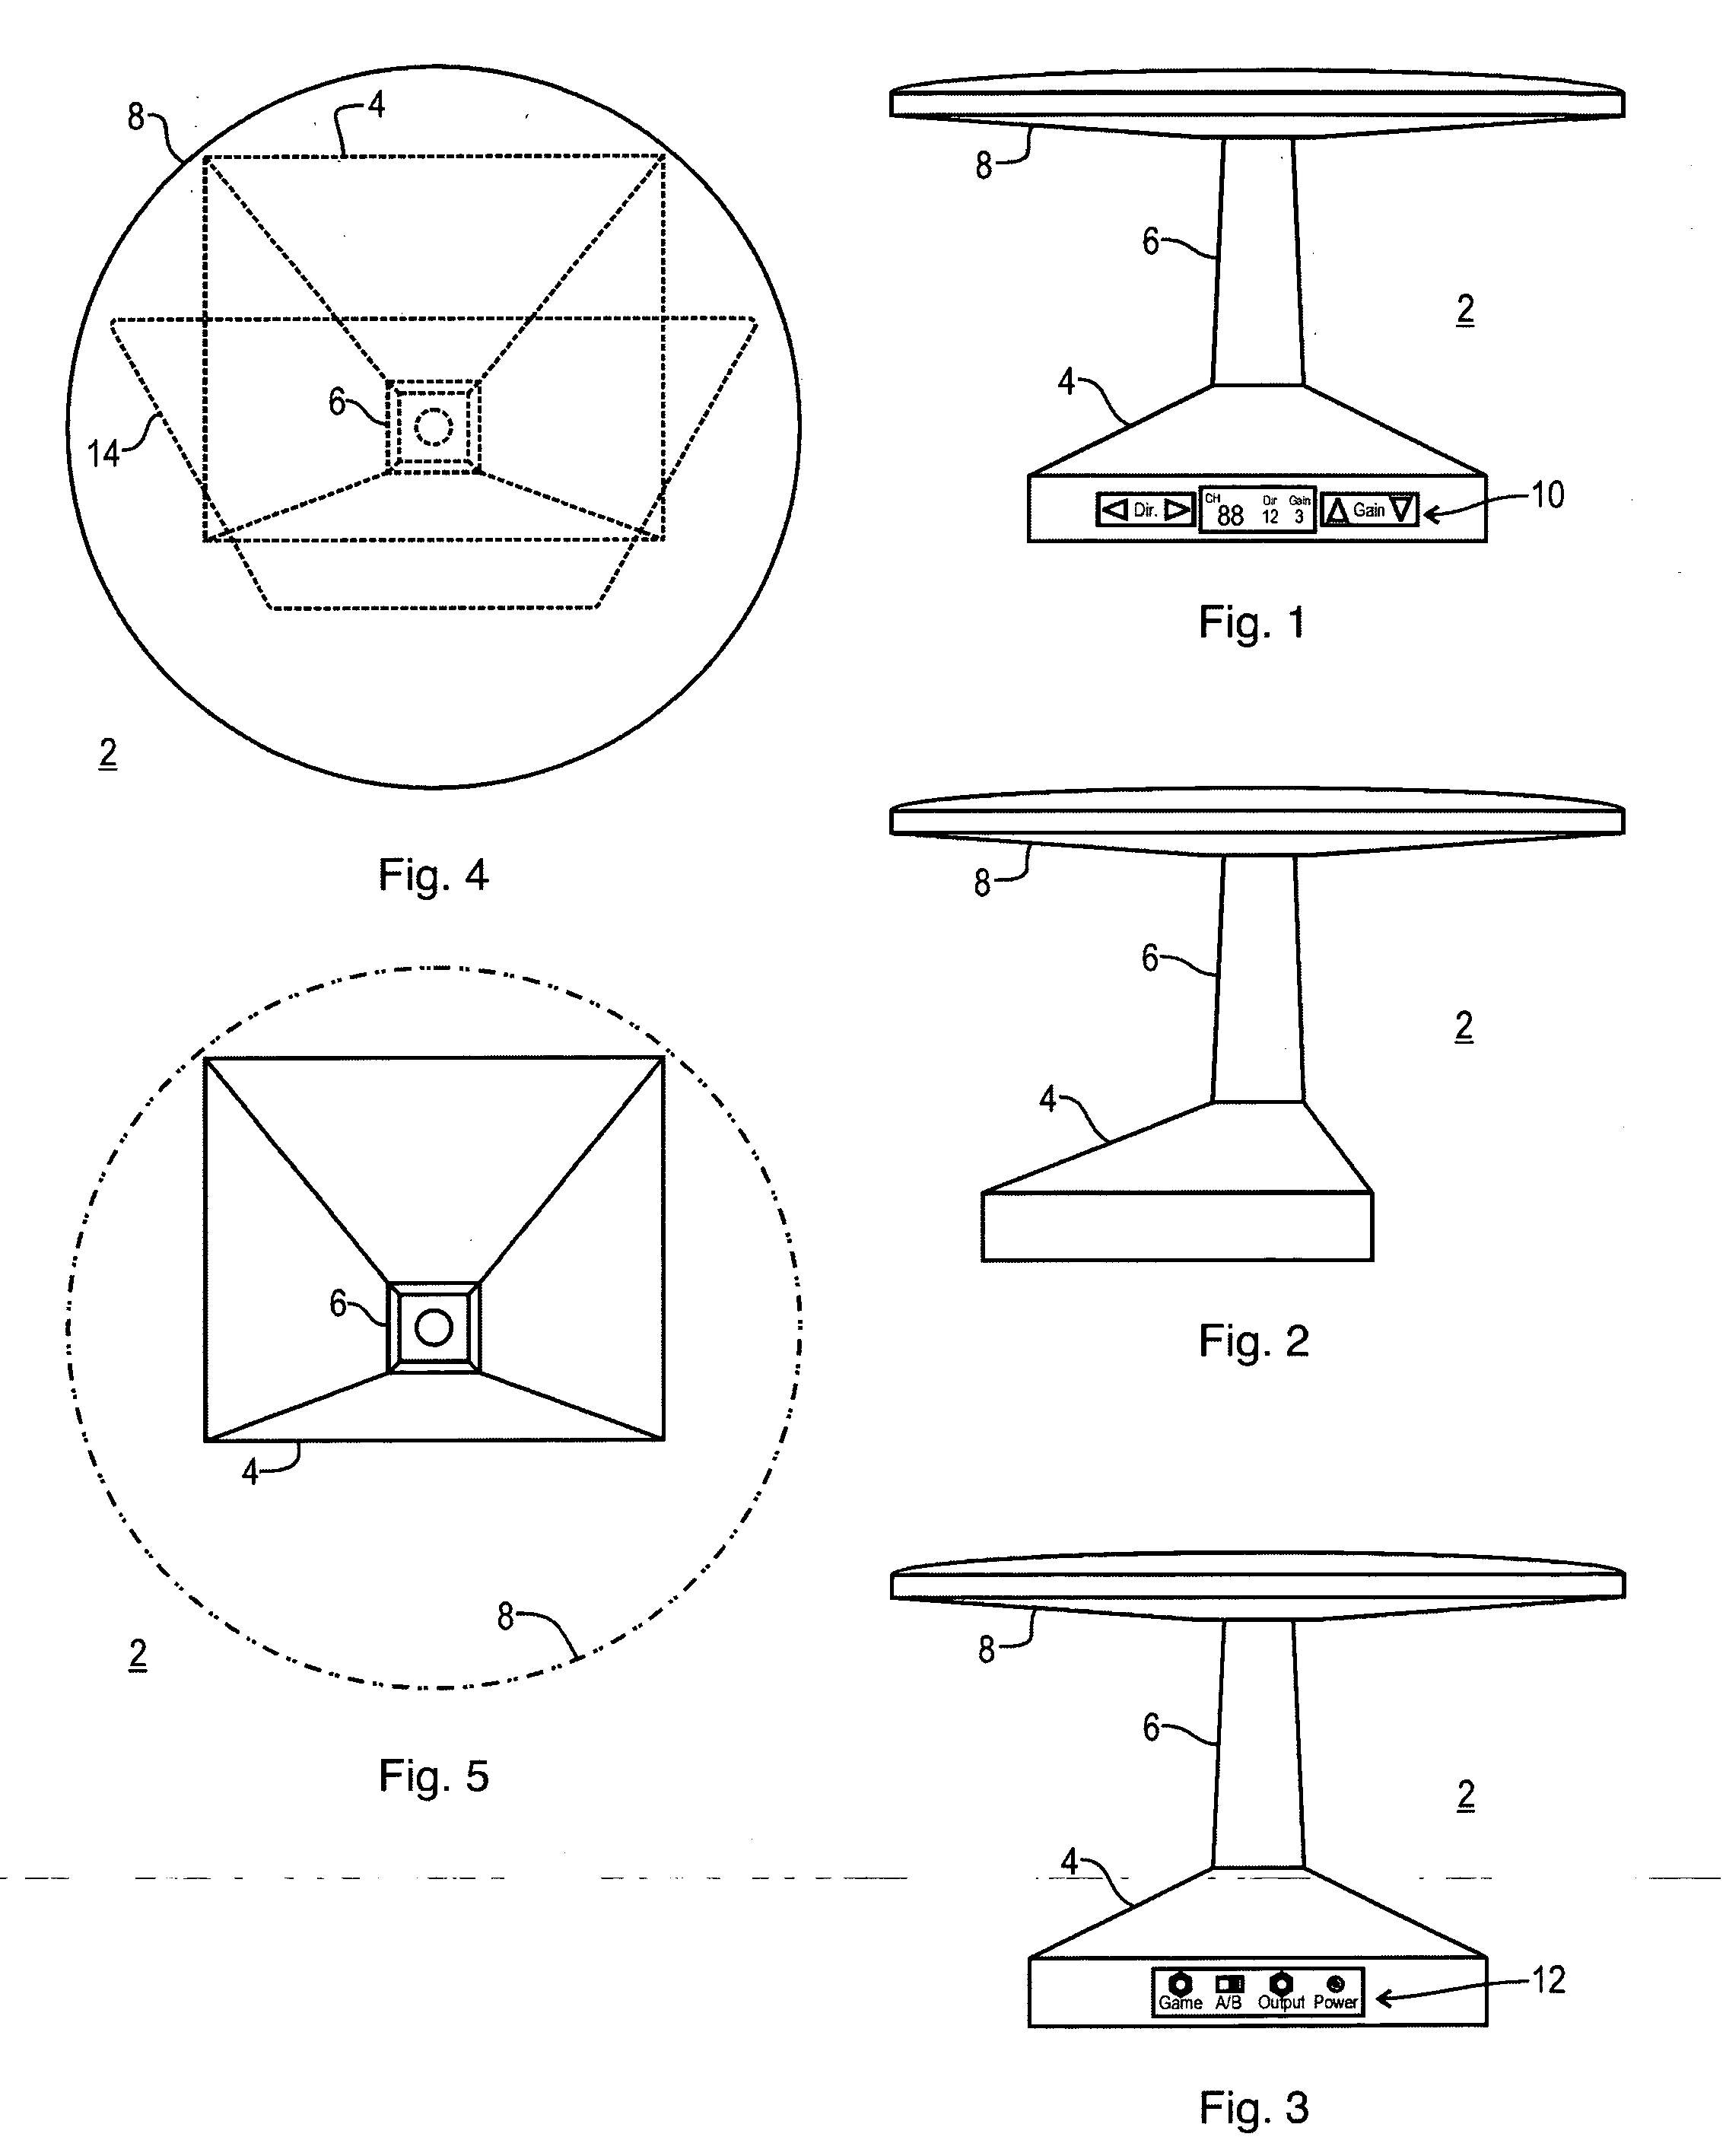 Remotely controlled antenna and method